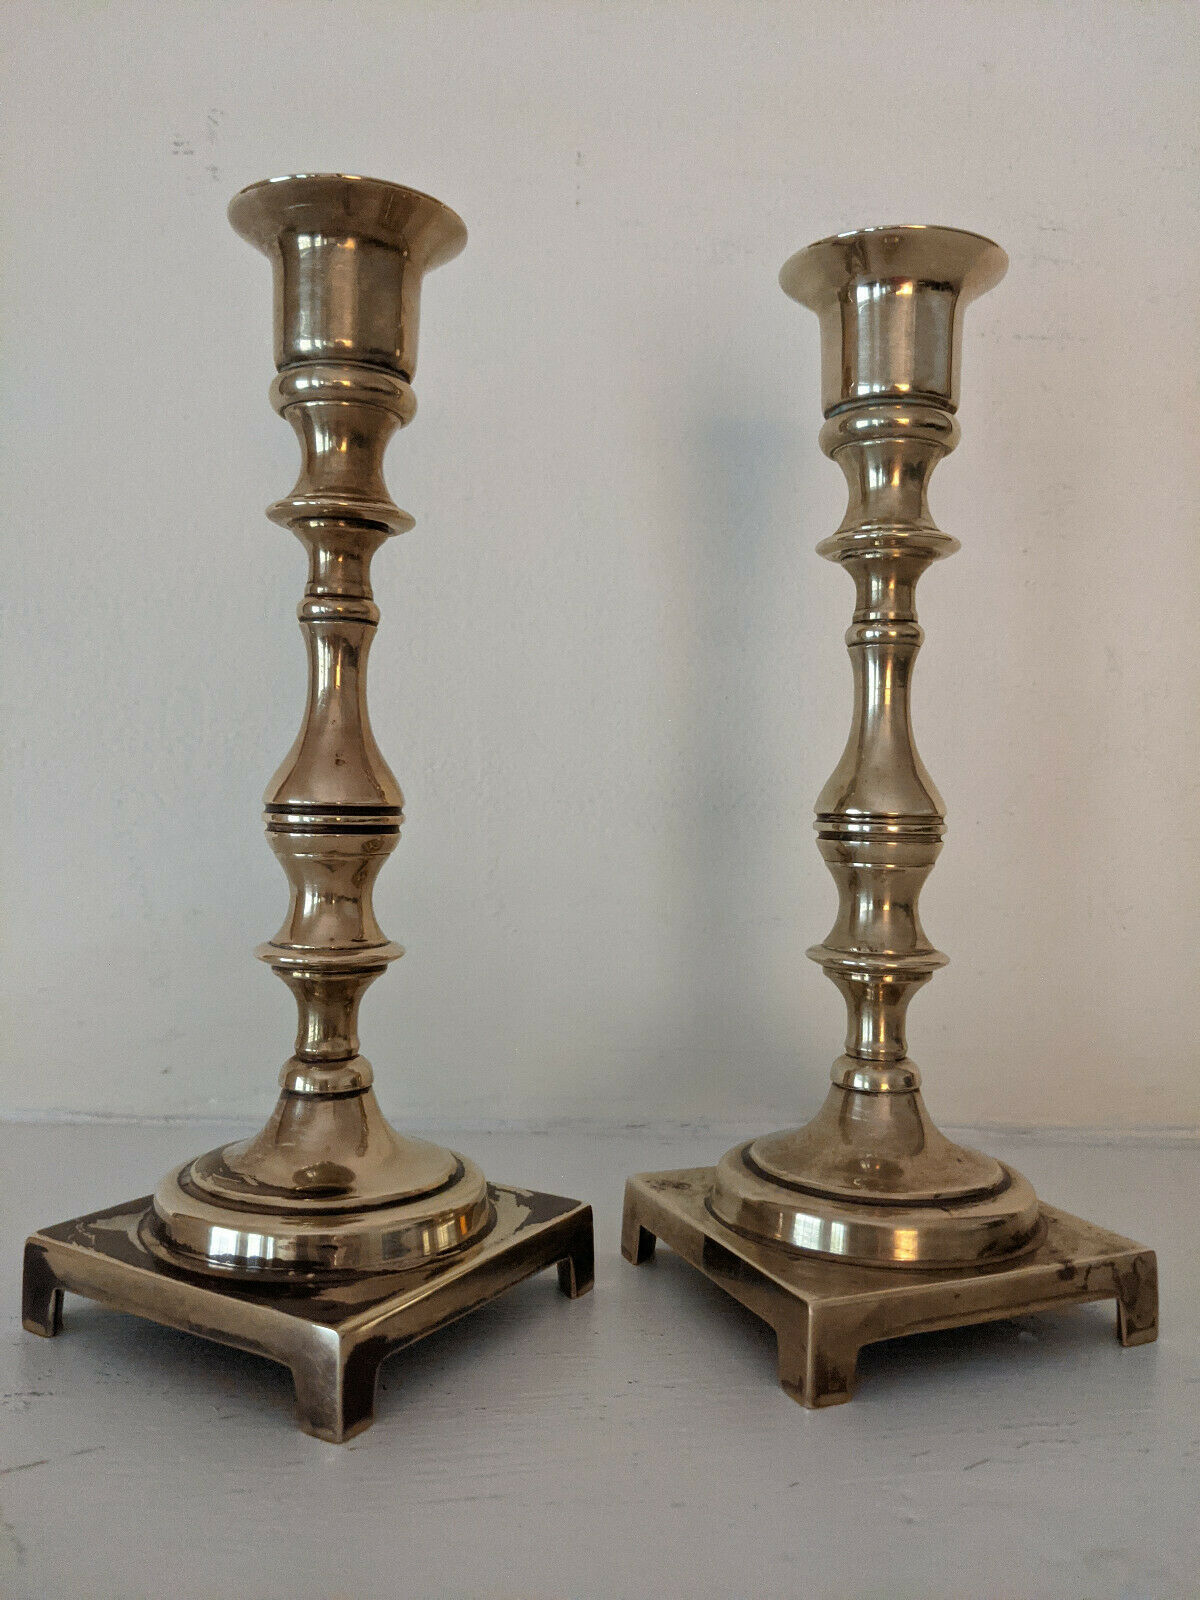 Baldwin Forged in America Brass Candlestick Pair EB Mark Mid Century Vintage - $40.00